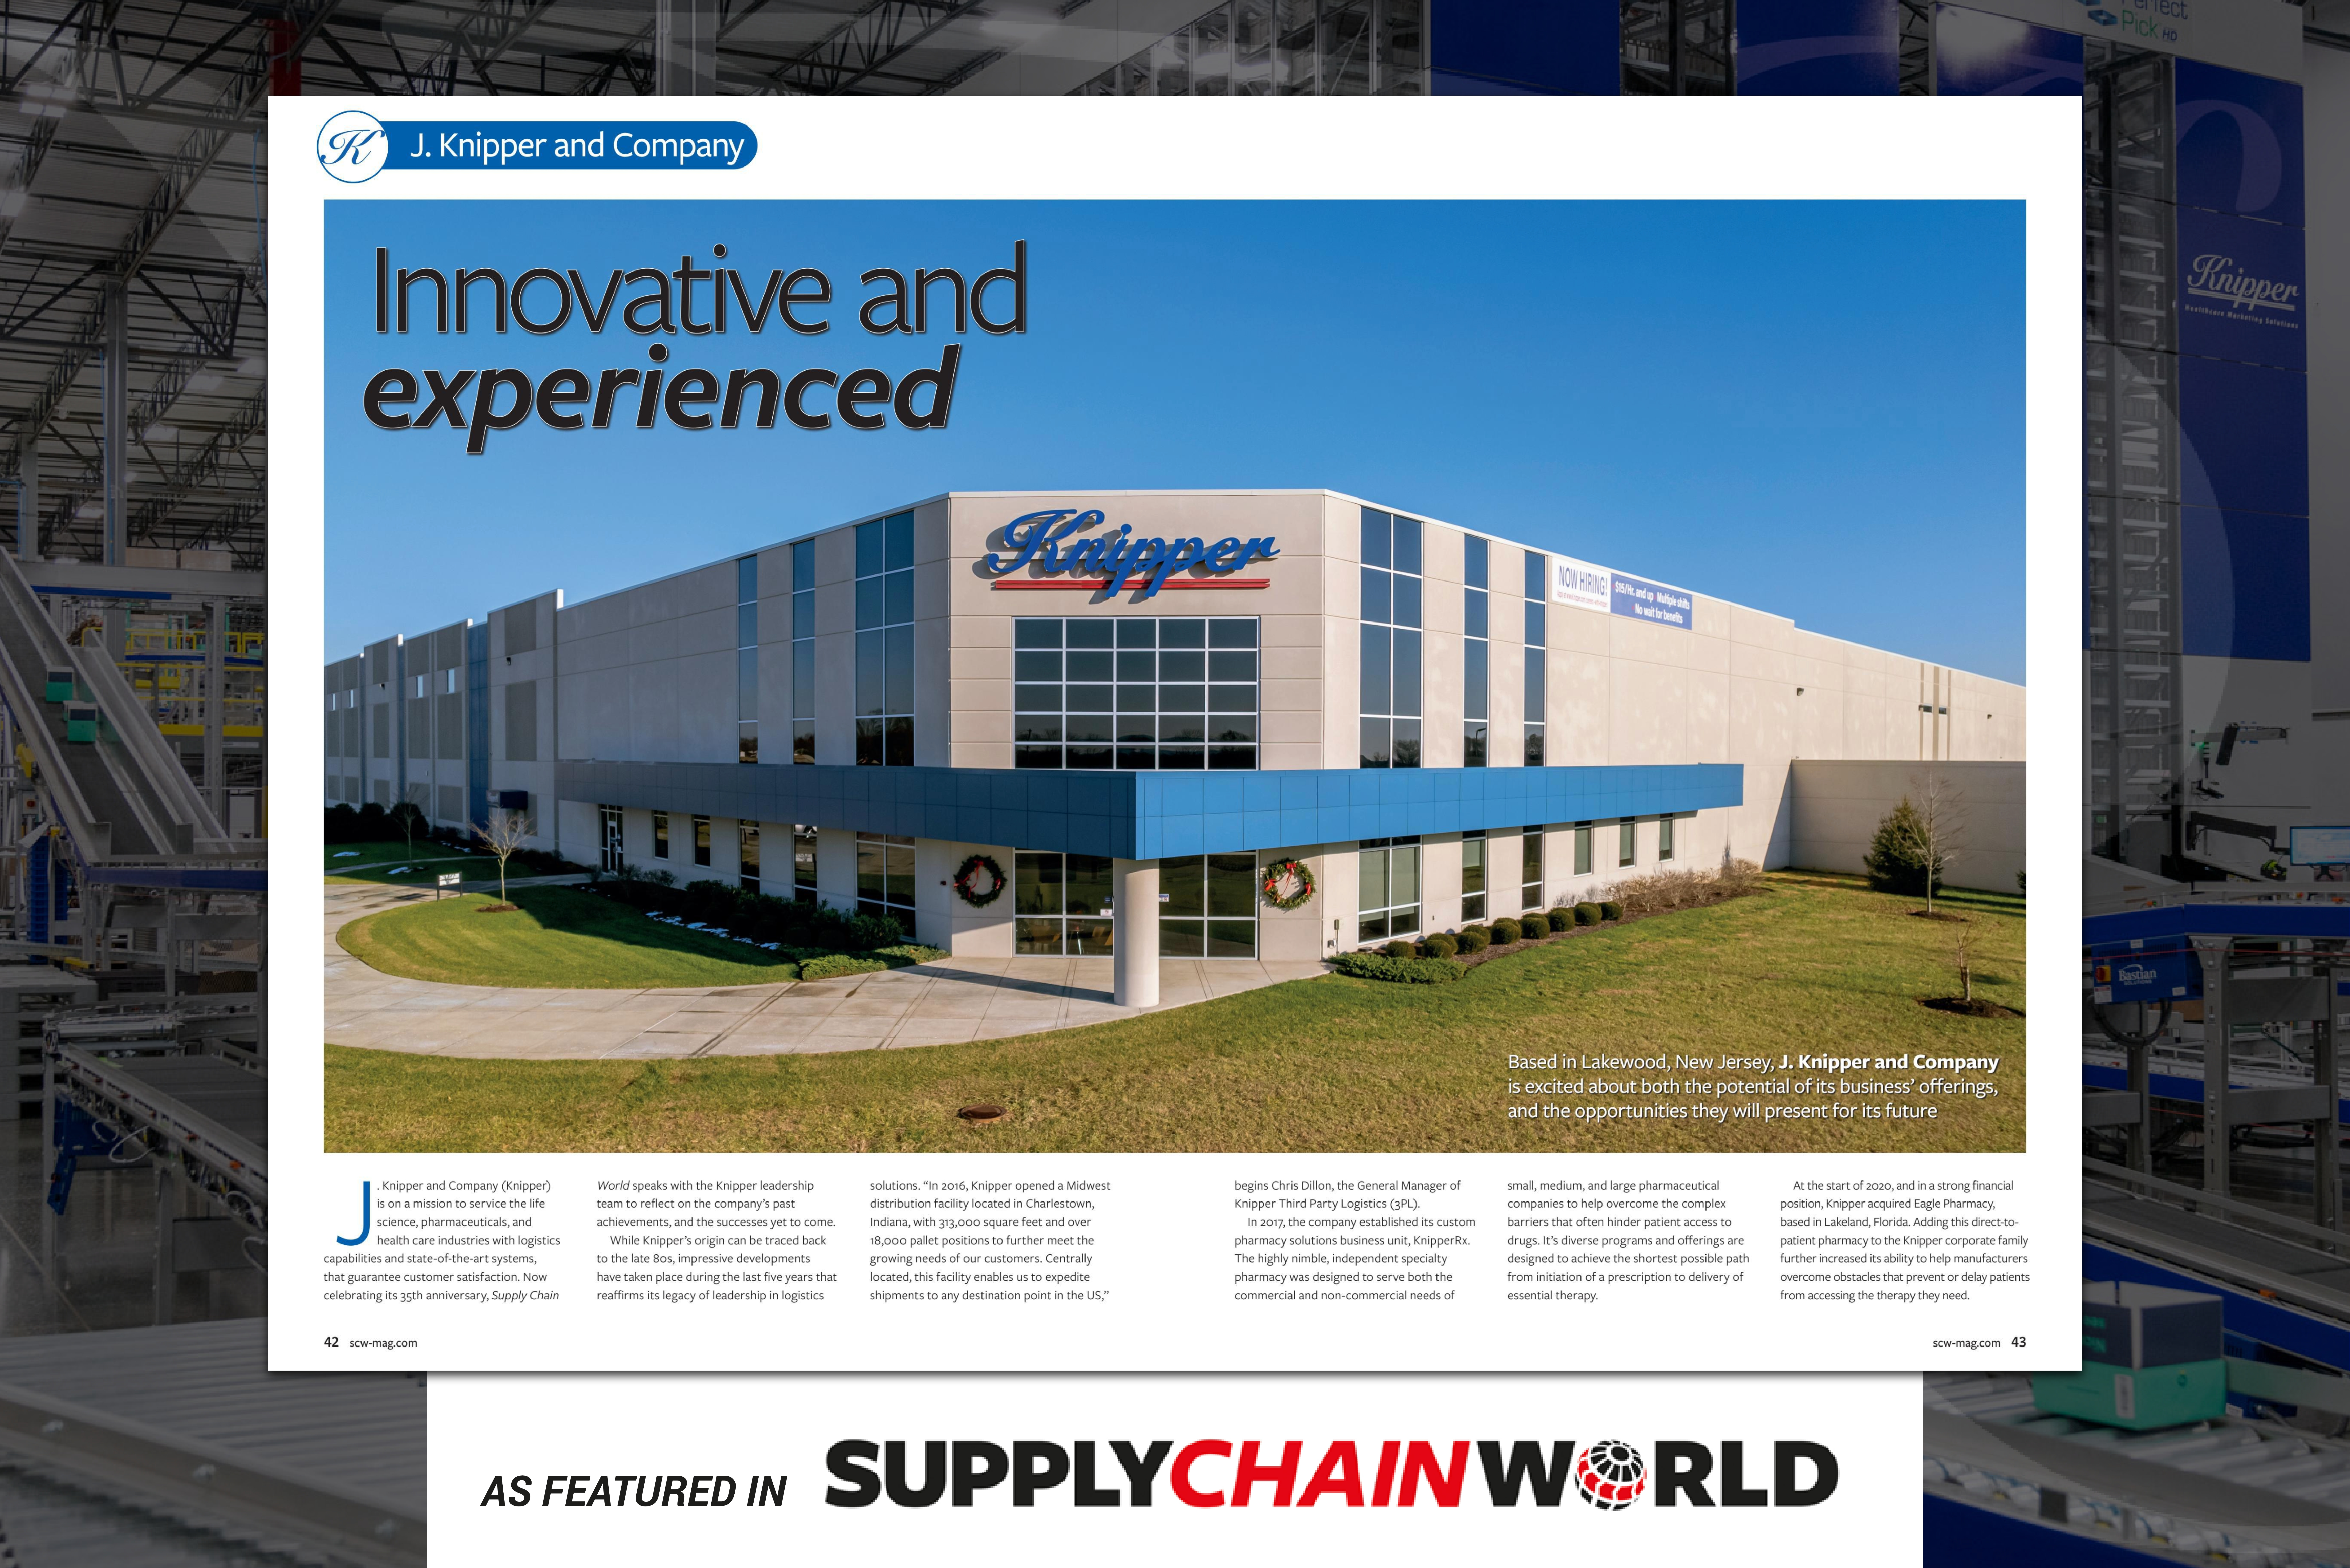 J. Knipper and Company Featured in Latest Supply Chain World Magazine